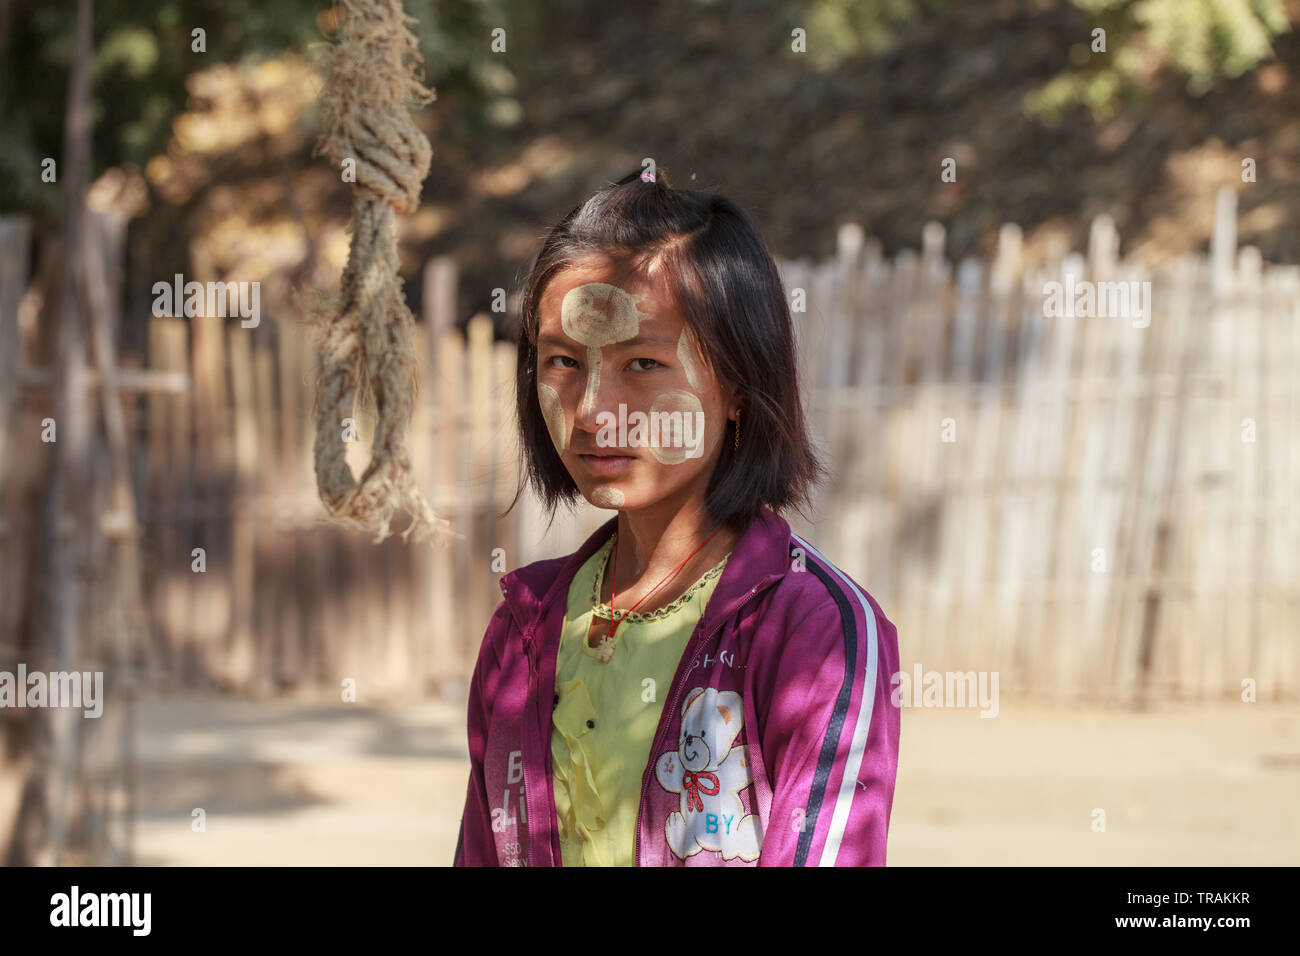 Life in the village: portrait of a young girl with typical burmese makeup Stock Photo